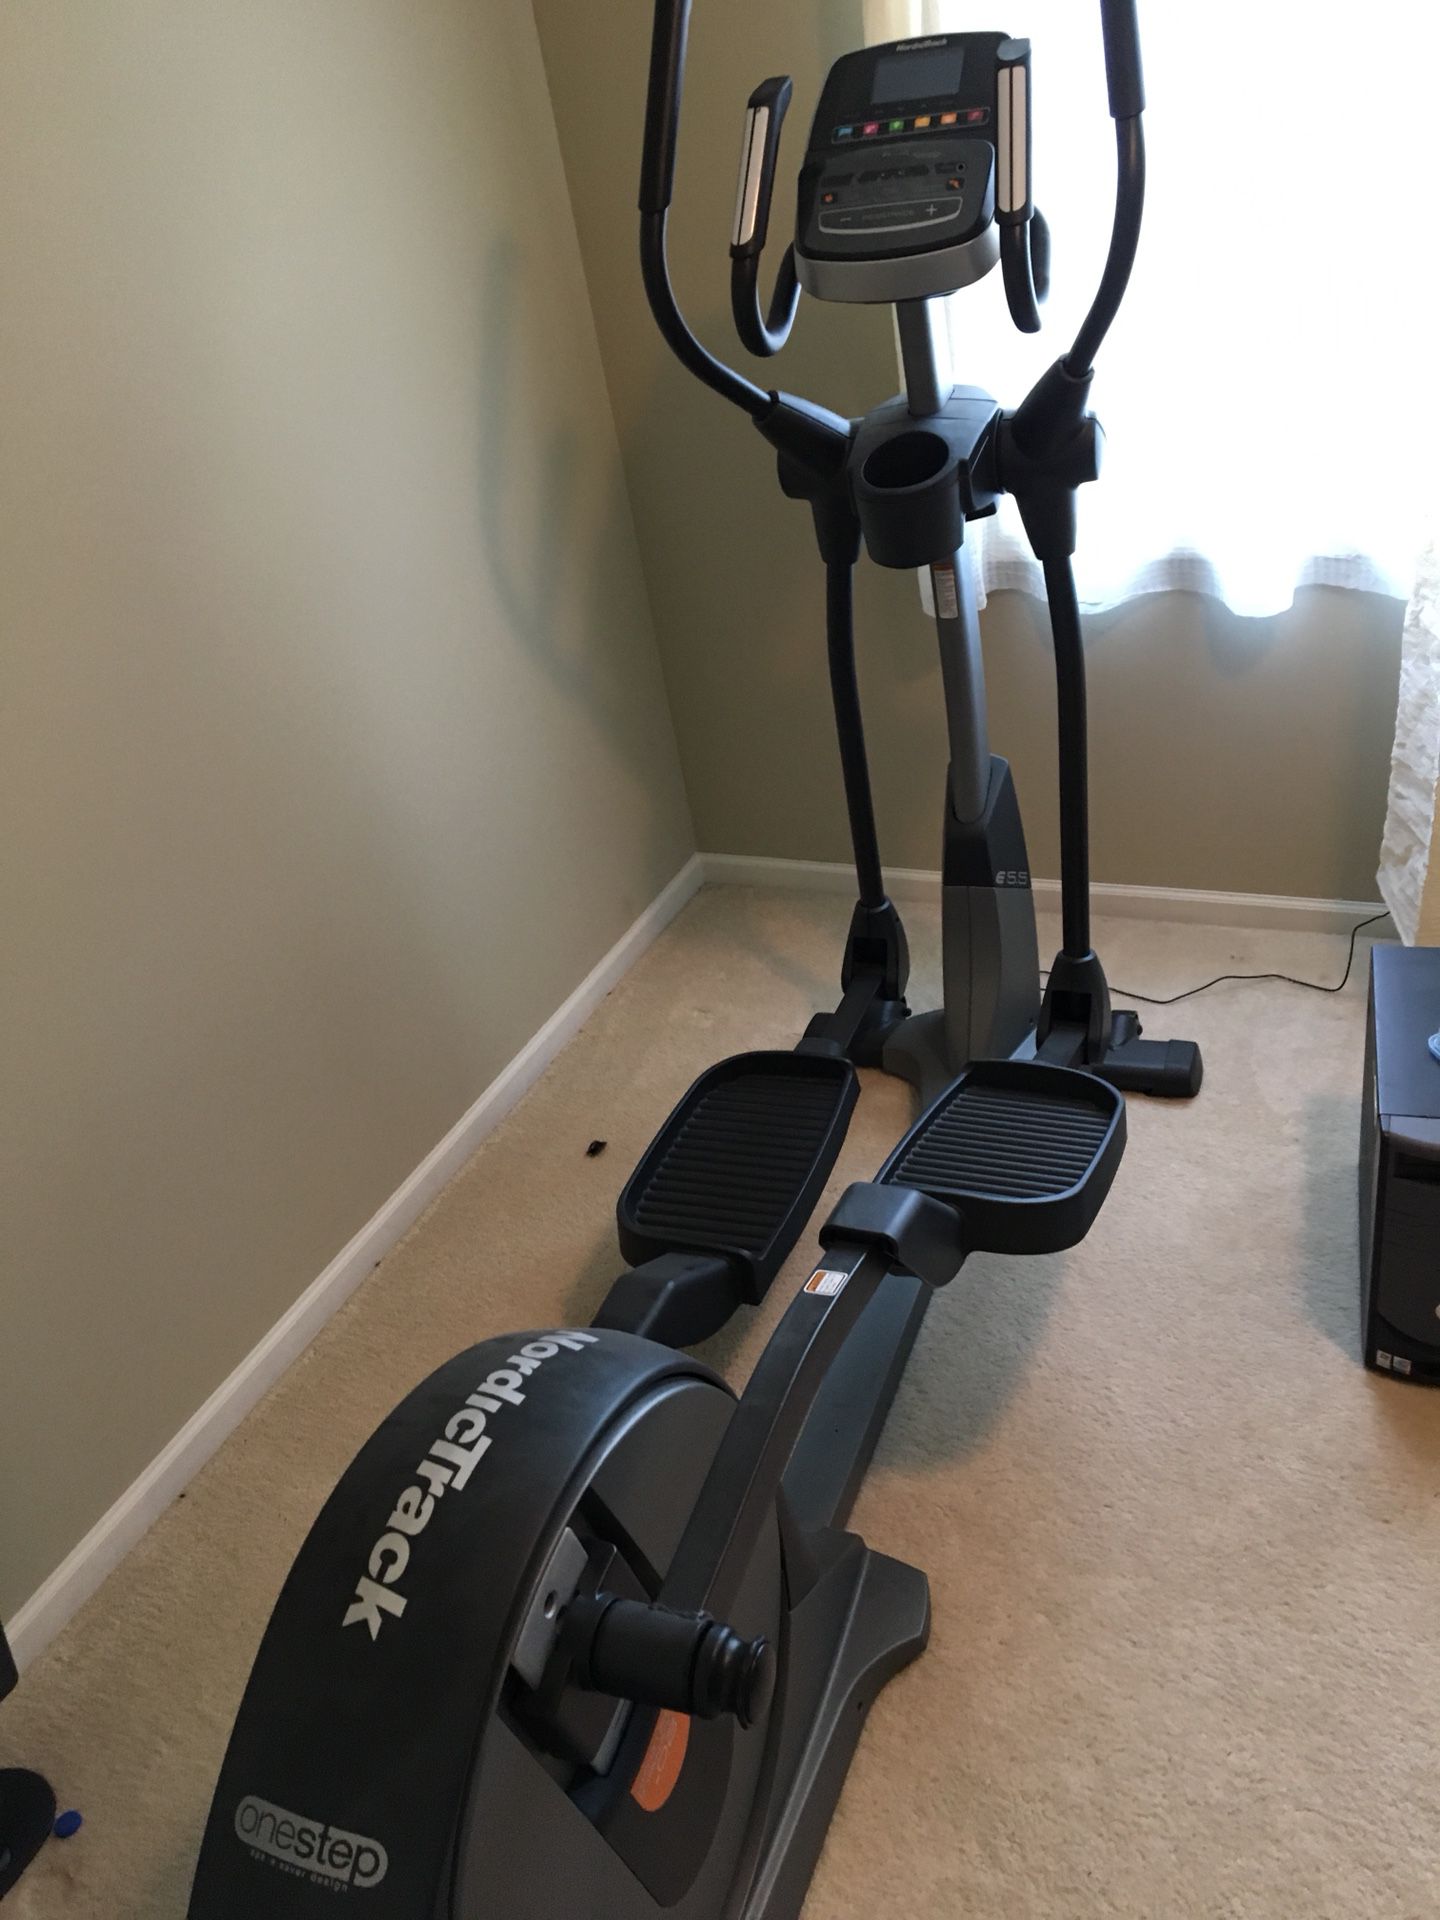 NordicTrack E5.5 Elliptical - Barely used